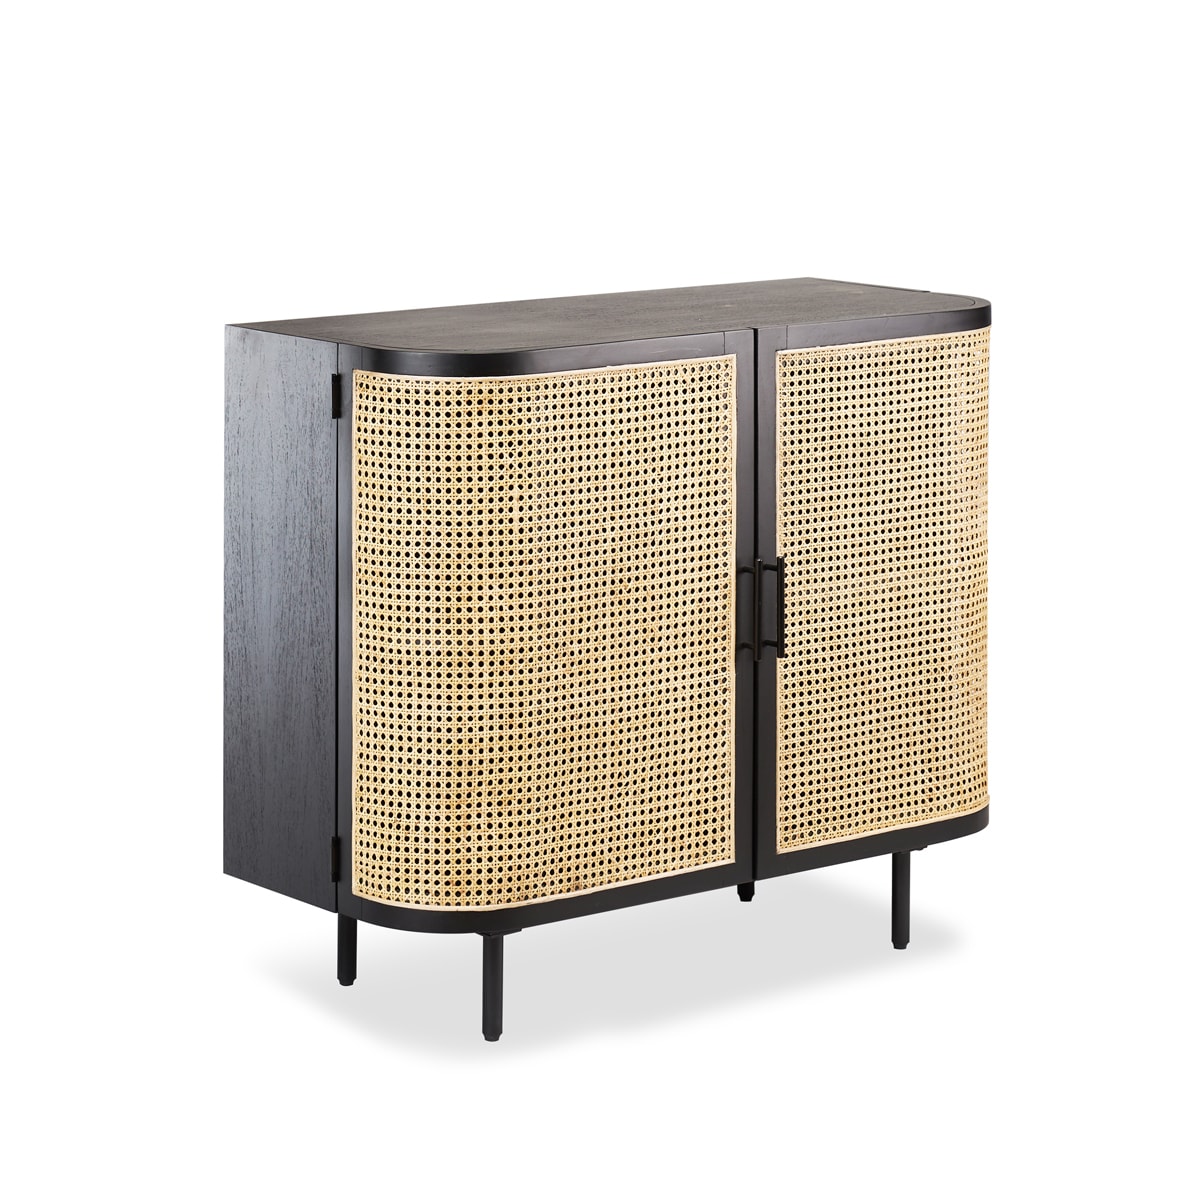 Embrace Rattan Sideboard 100cm - Black - Angle View by RJ Living